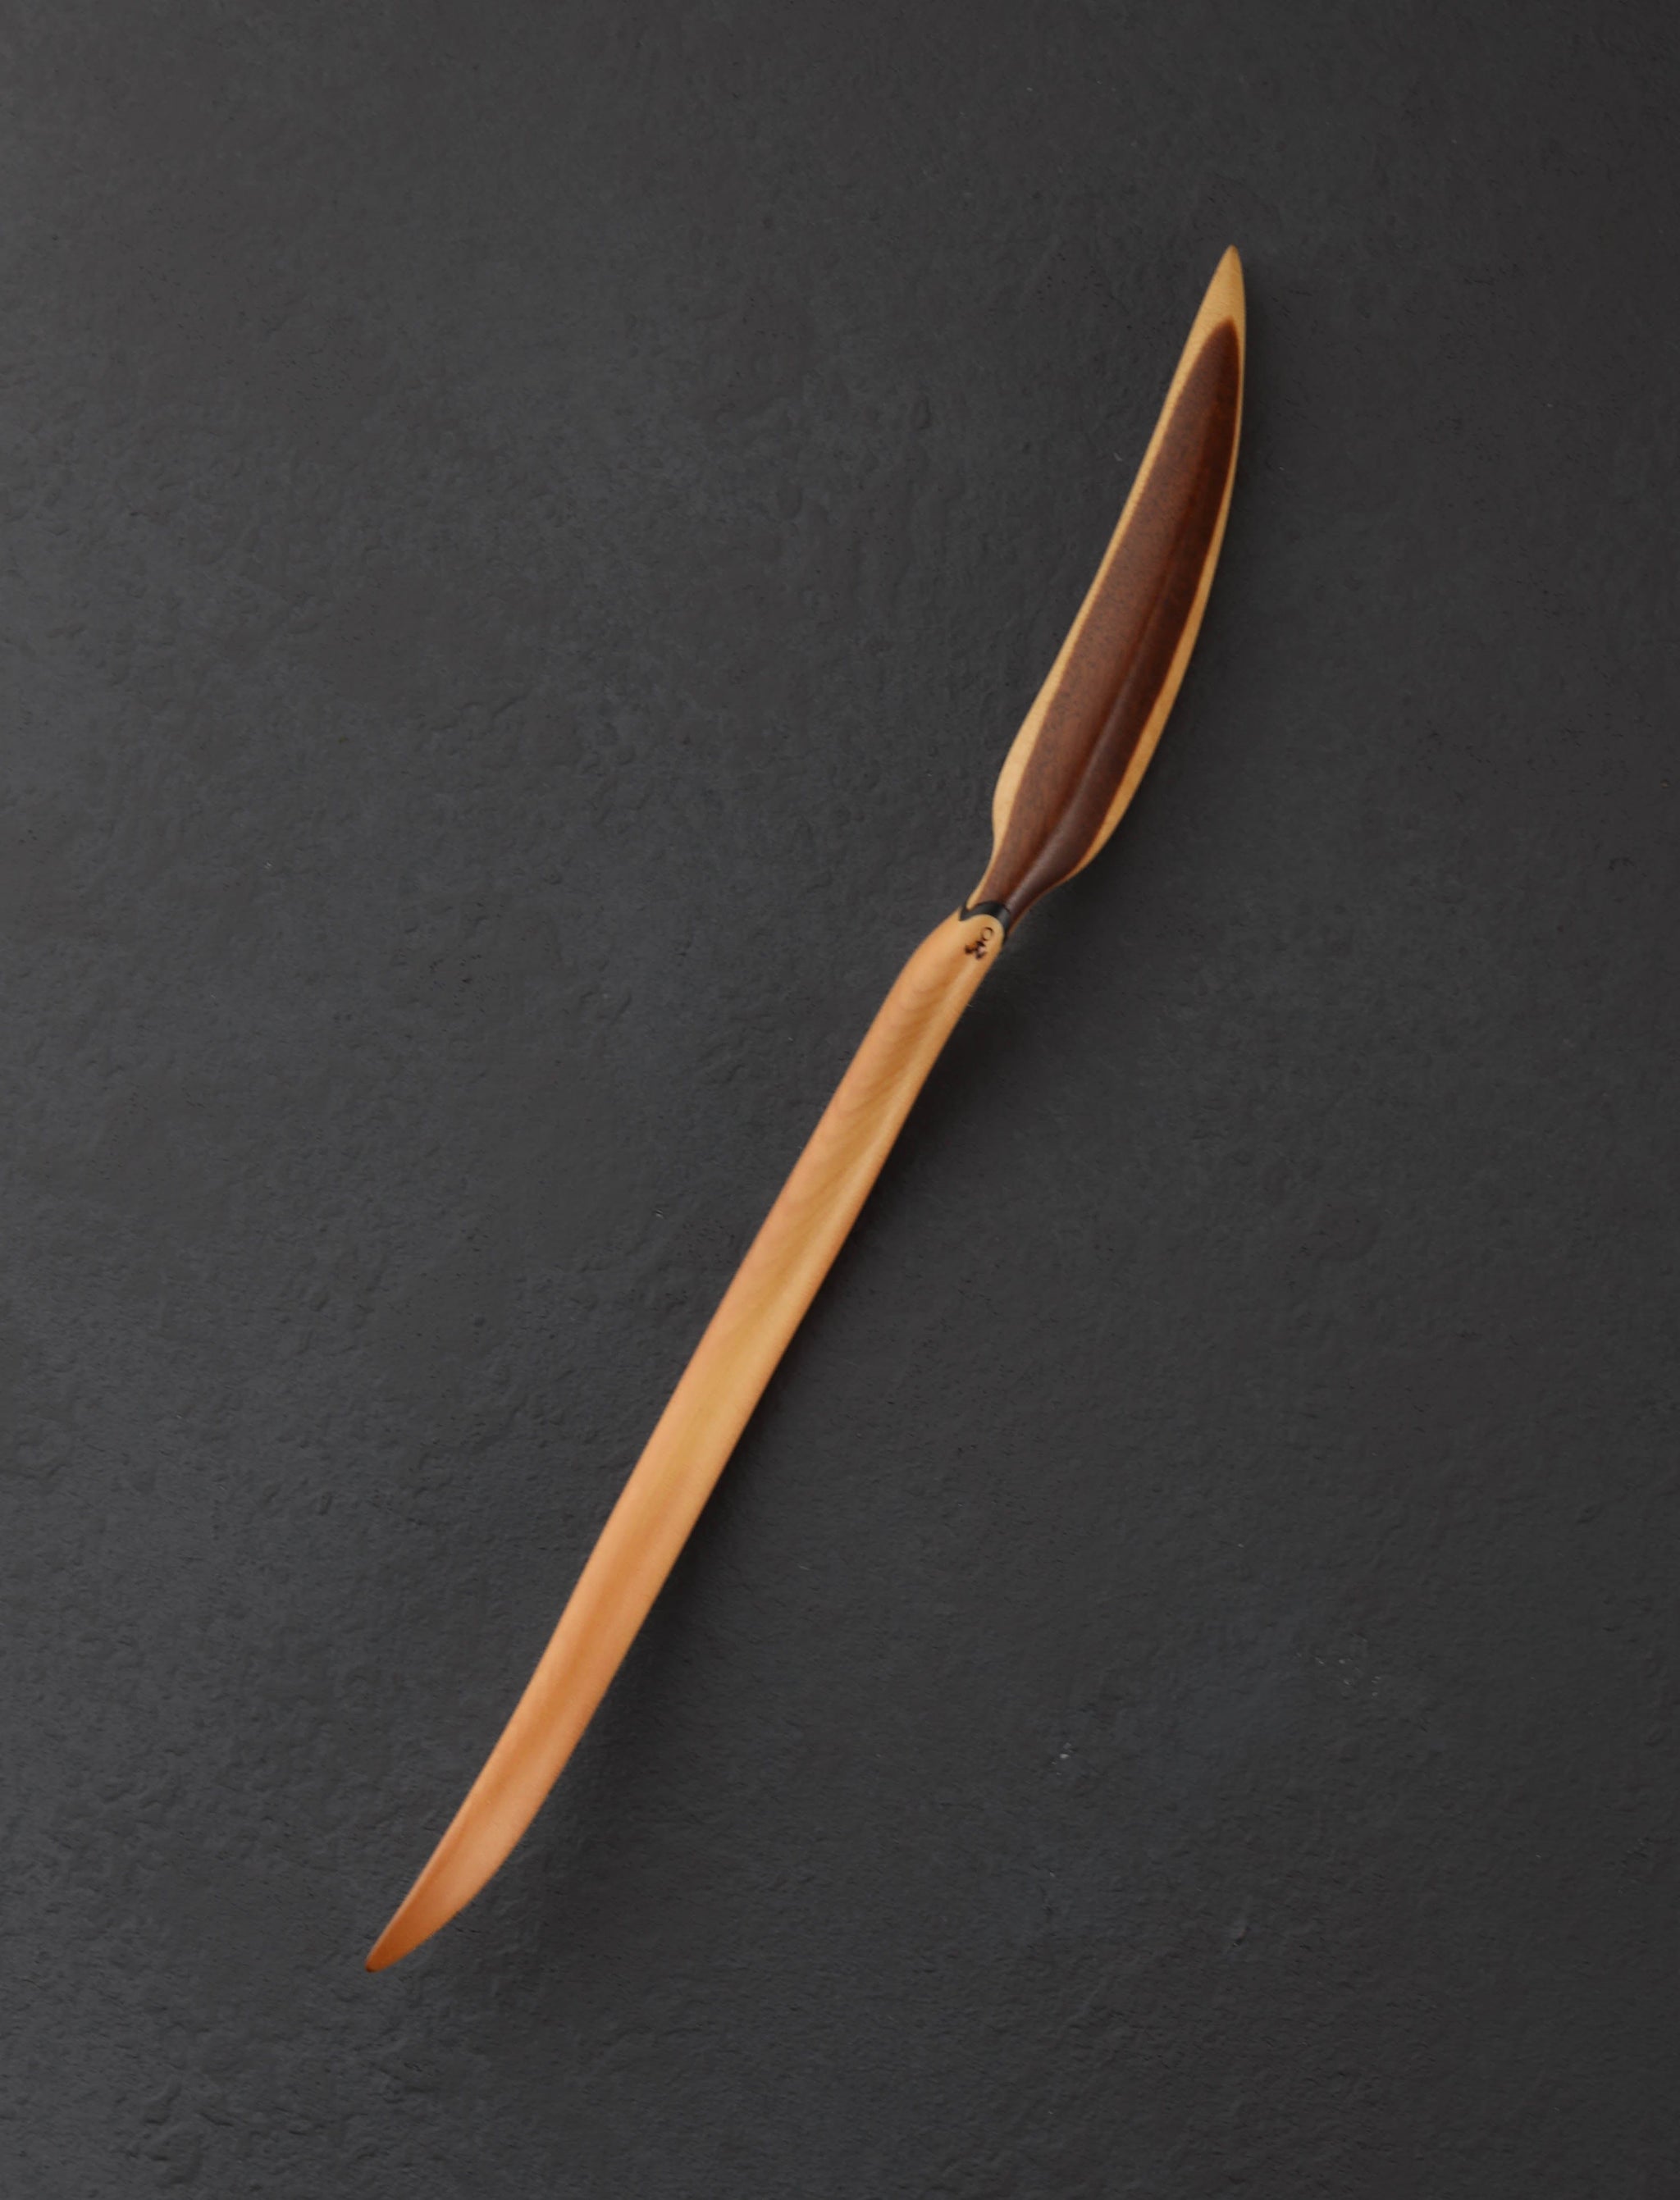 Terry Widner, Spoontaneous - Florida Heliconia Spoon